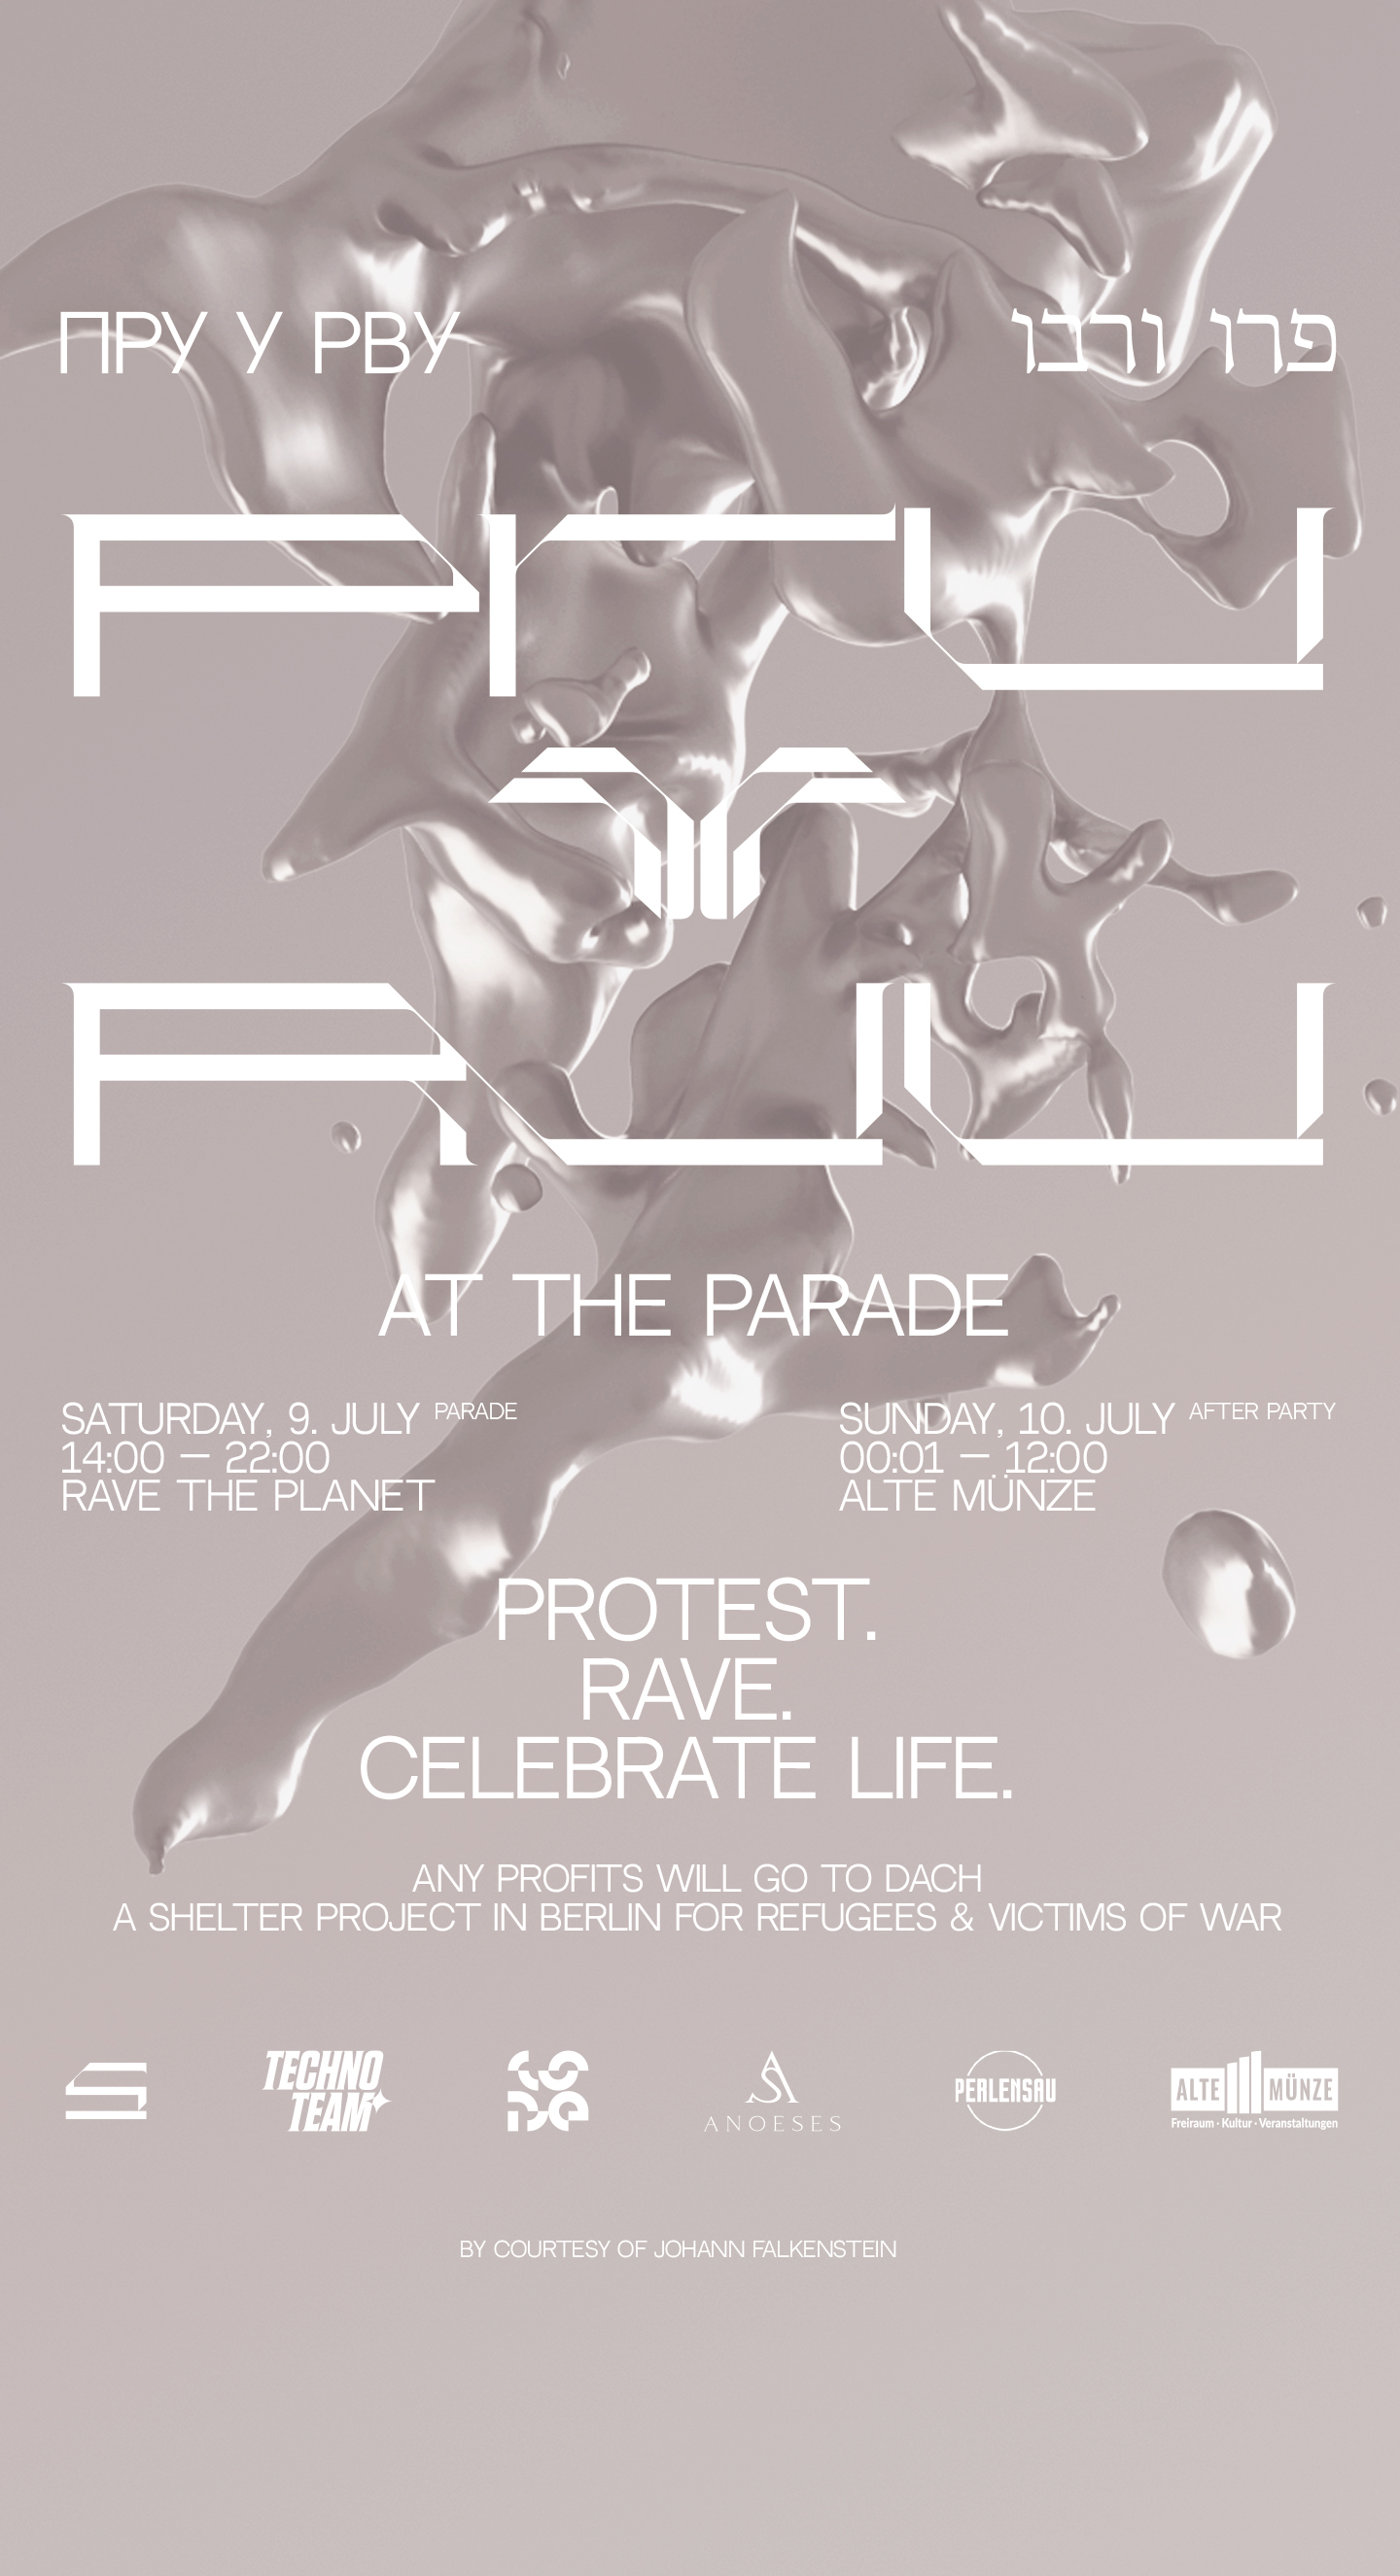 PRU Y RVU at THE PARADE - Flyer front